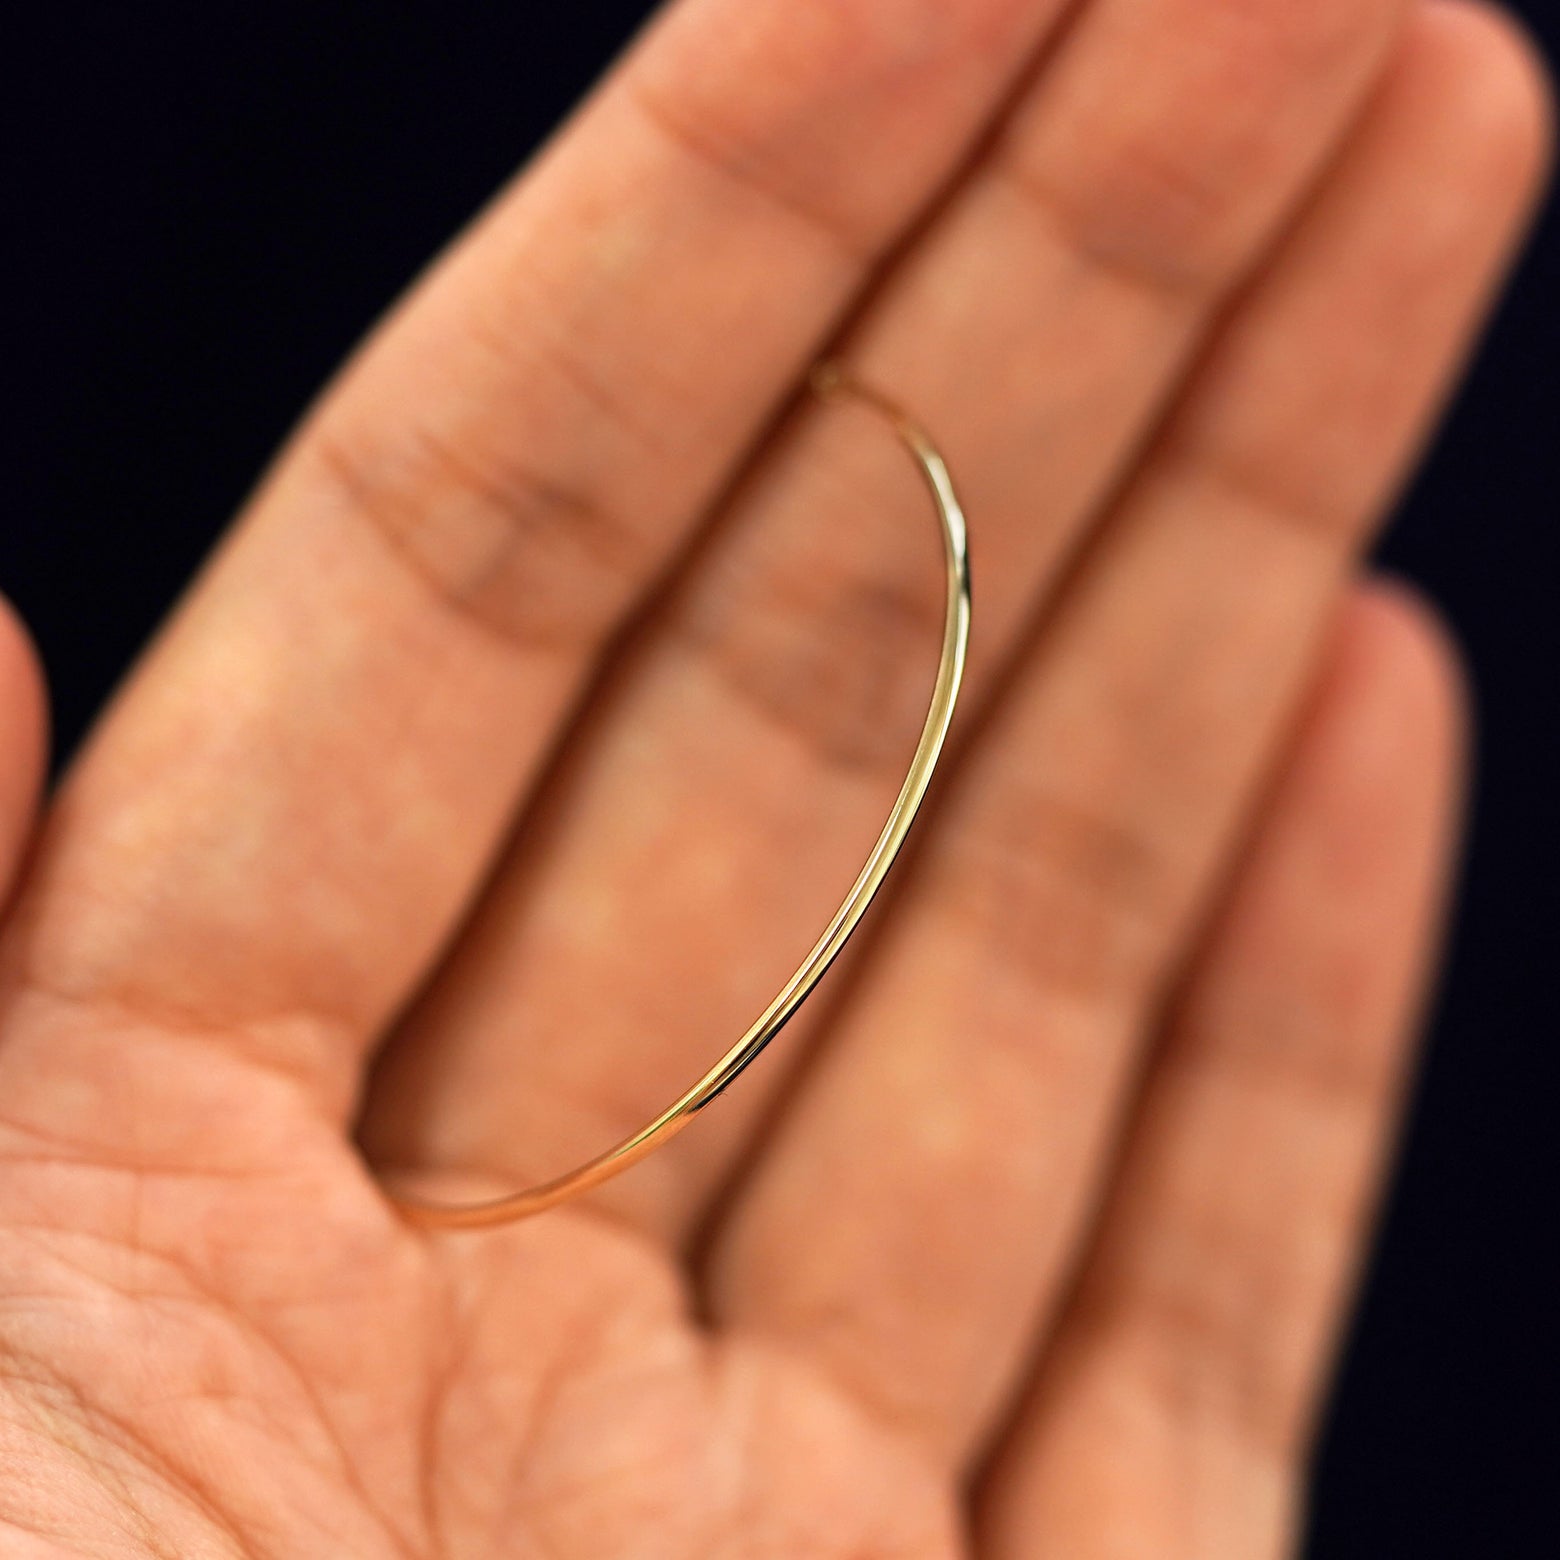 A 14k gold Small Endless Hoop Earring held in between a model's fingers to show the hoops thickness